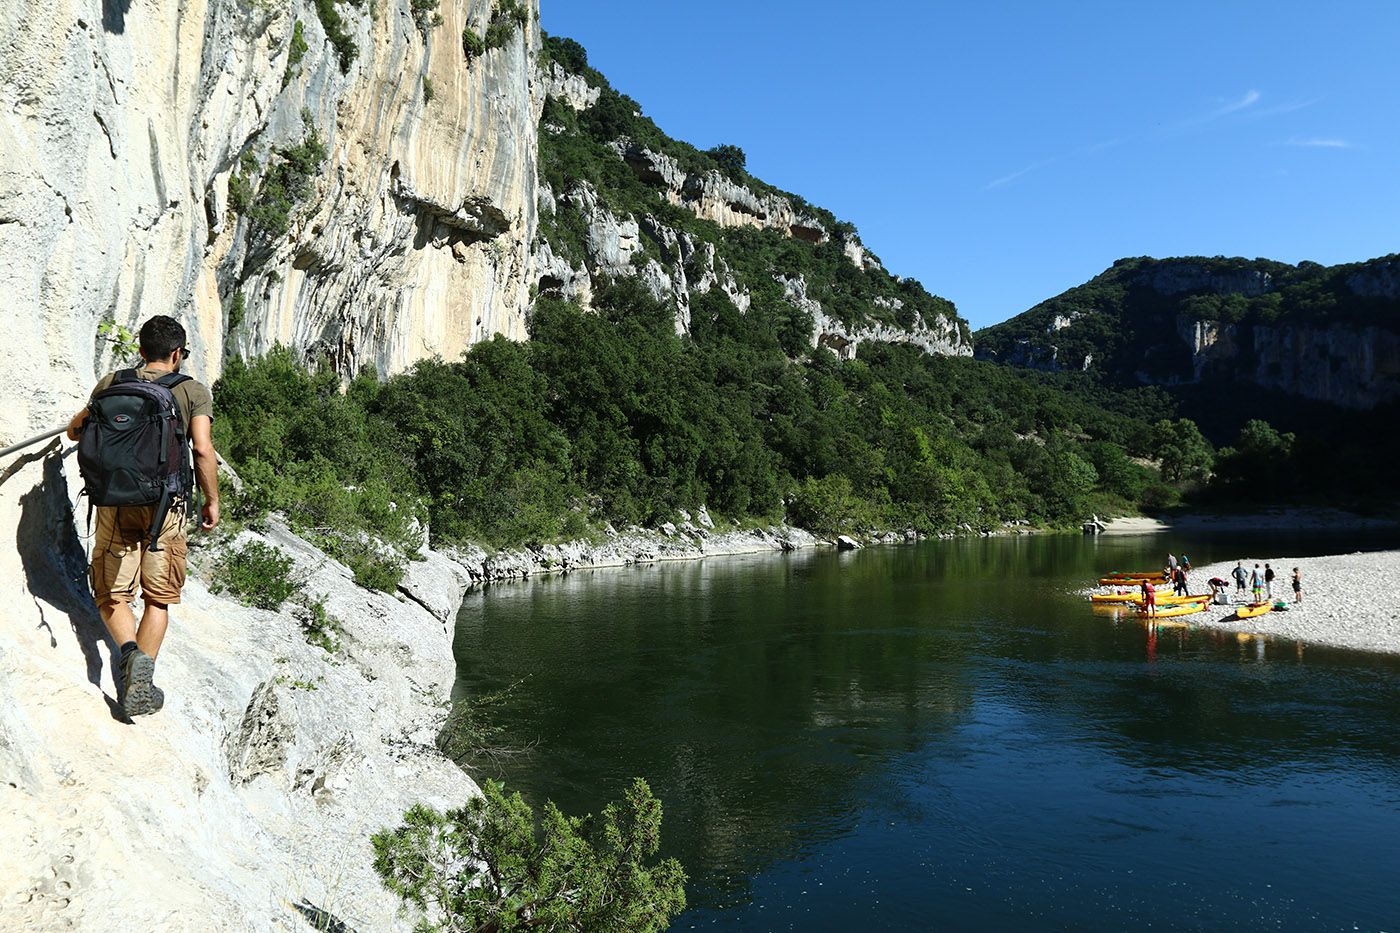 Hiking in the Ardèche Gorges